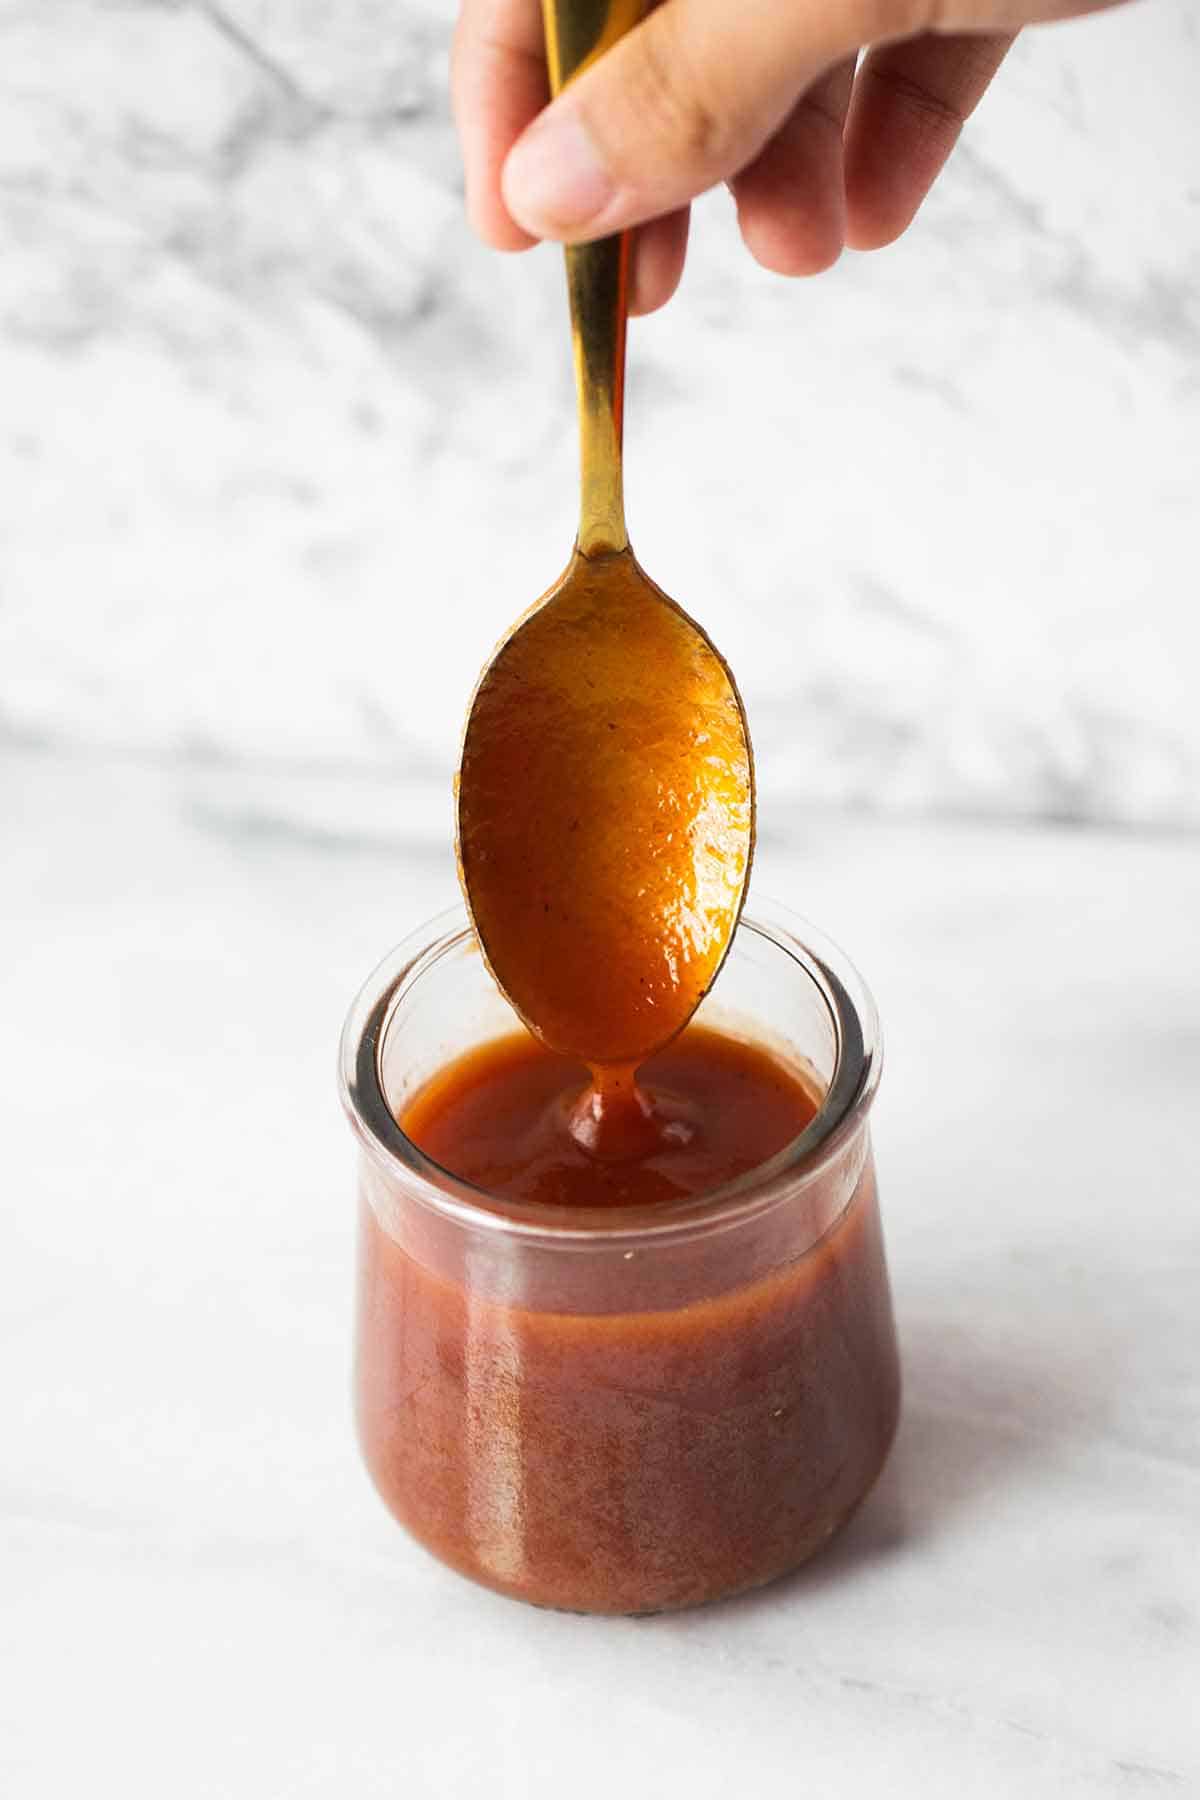 a jar and spoon filled with guava sauce.